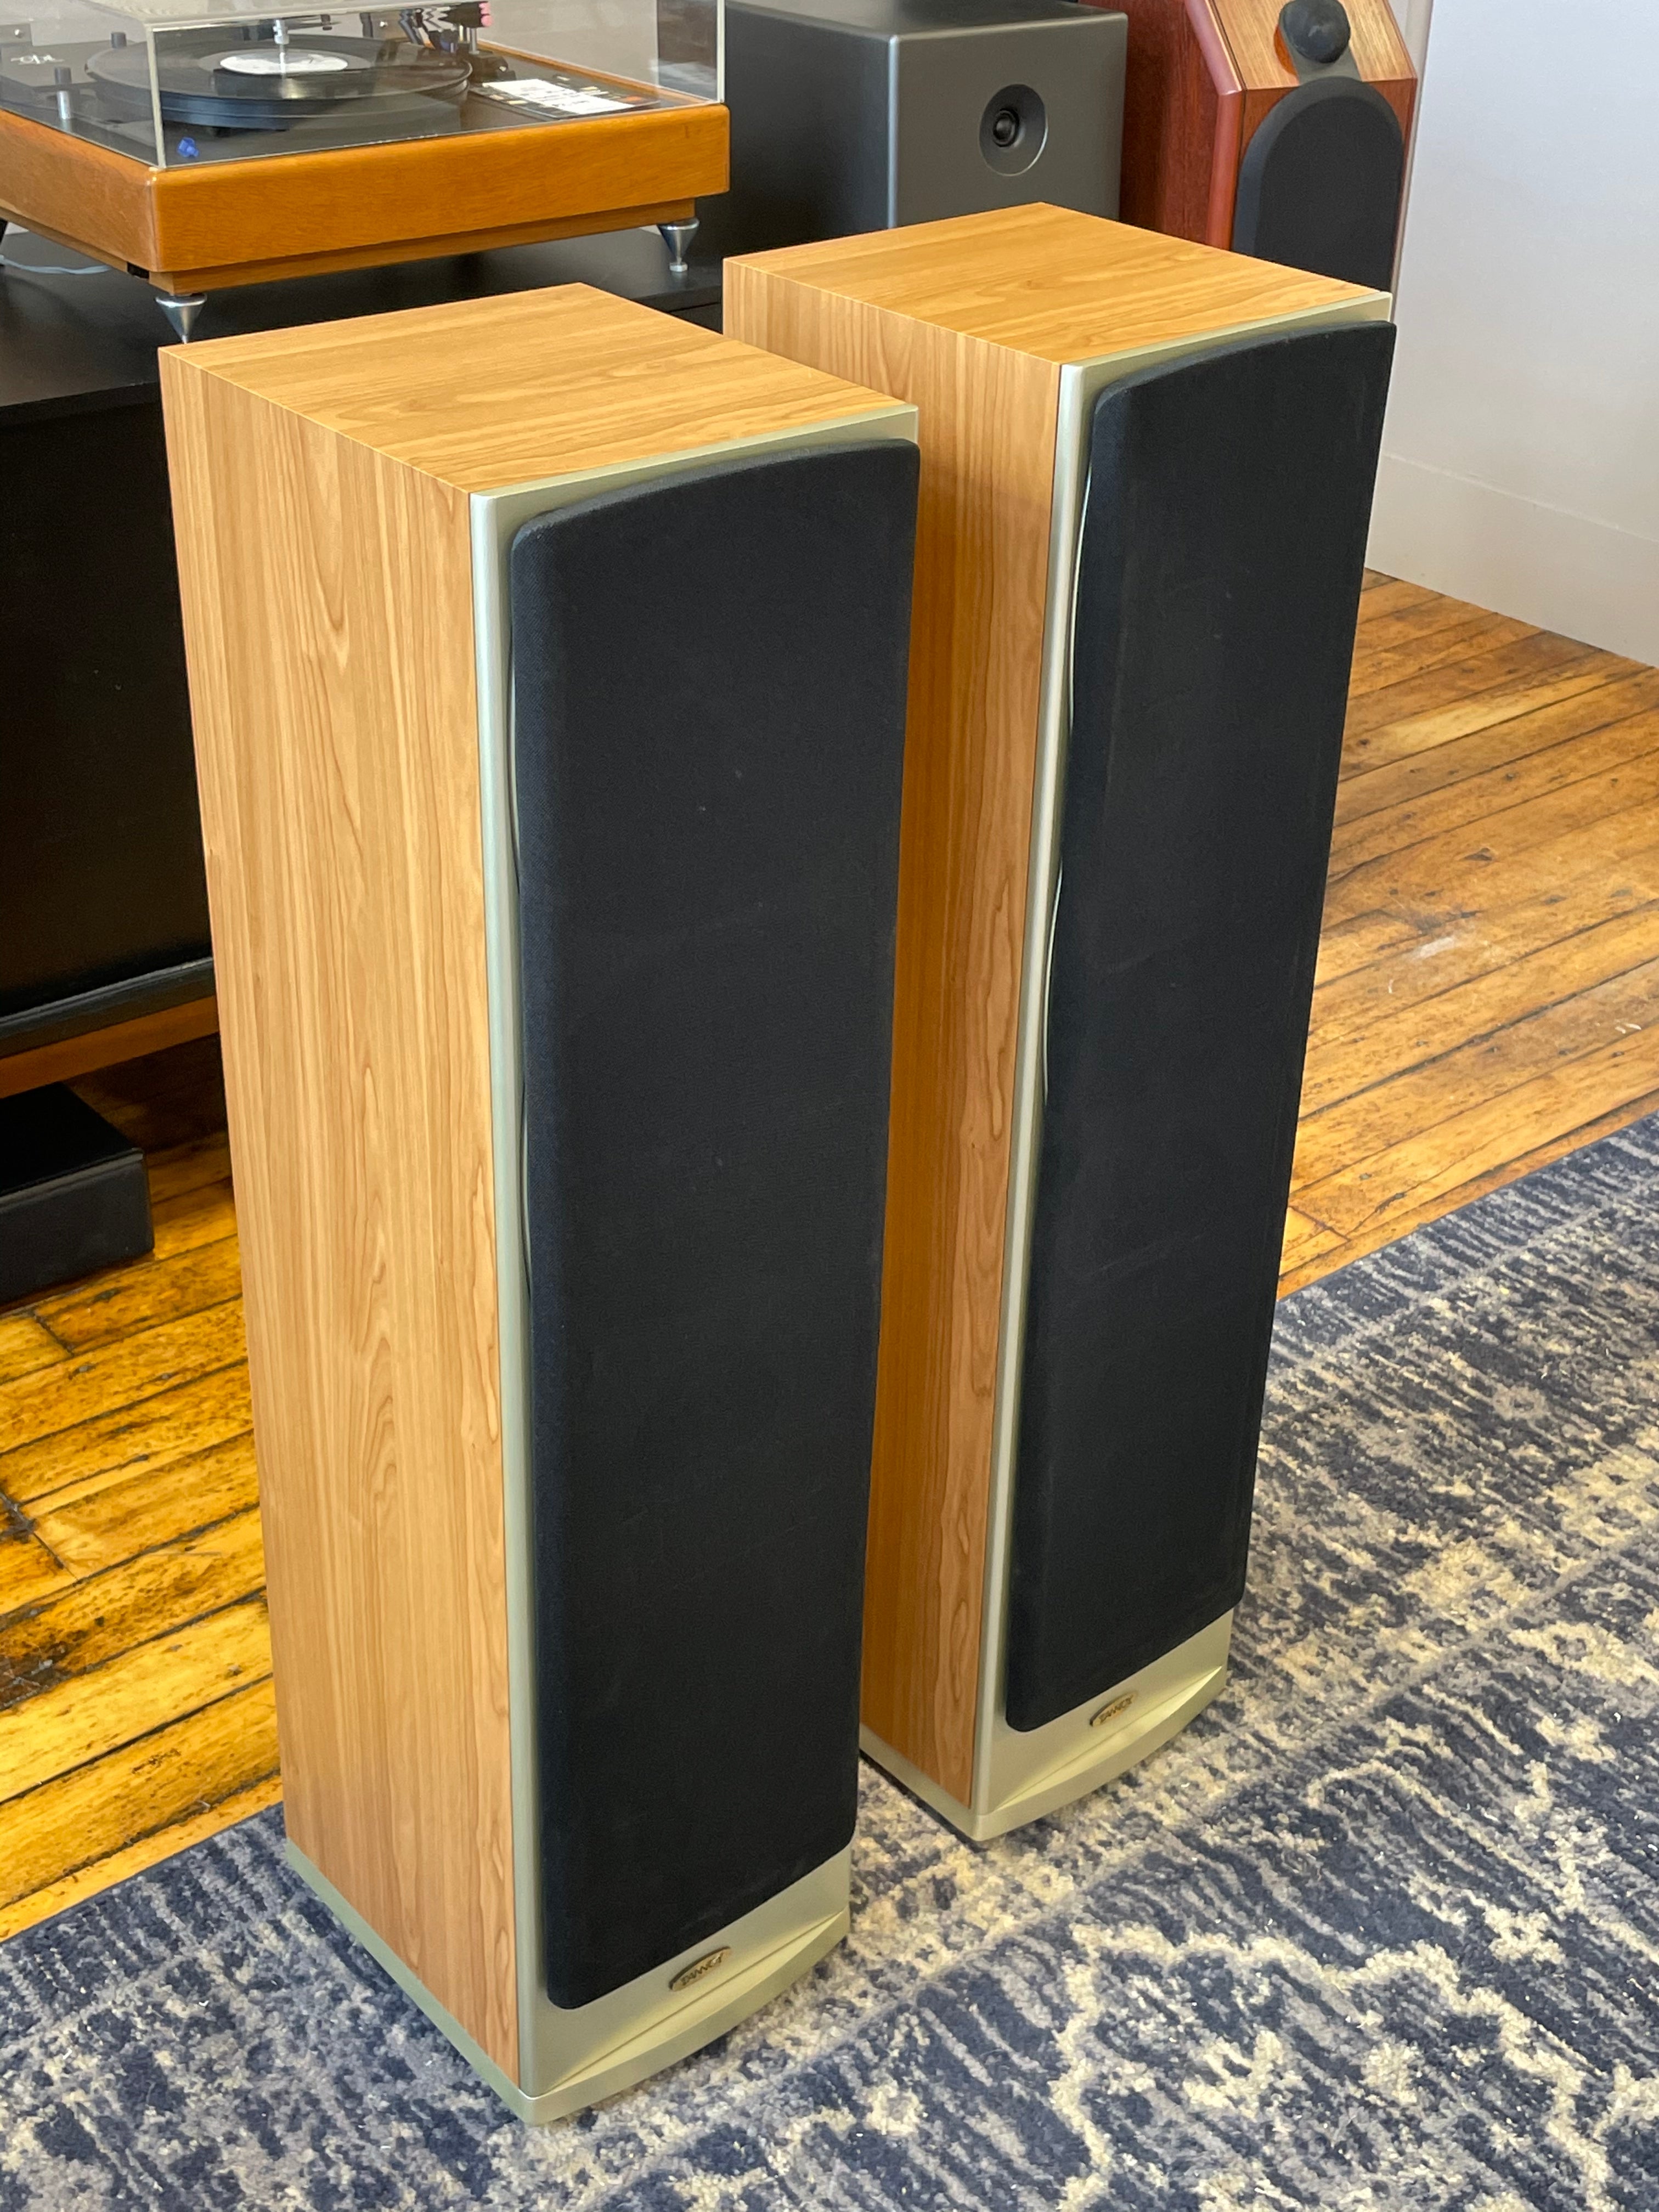 Tannoy Saturn S8 Tower Speakers in "Champagne" Finish - SOLD